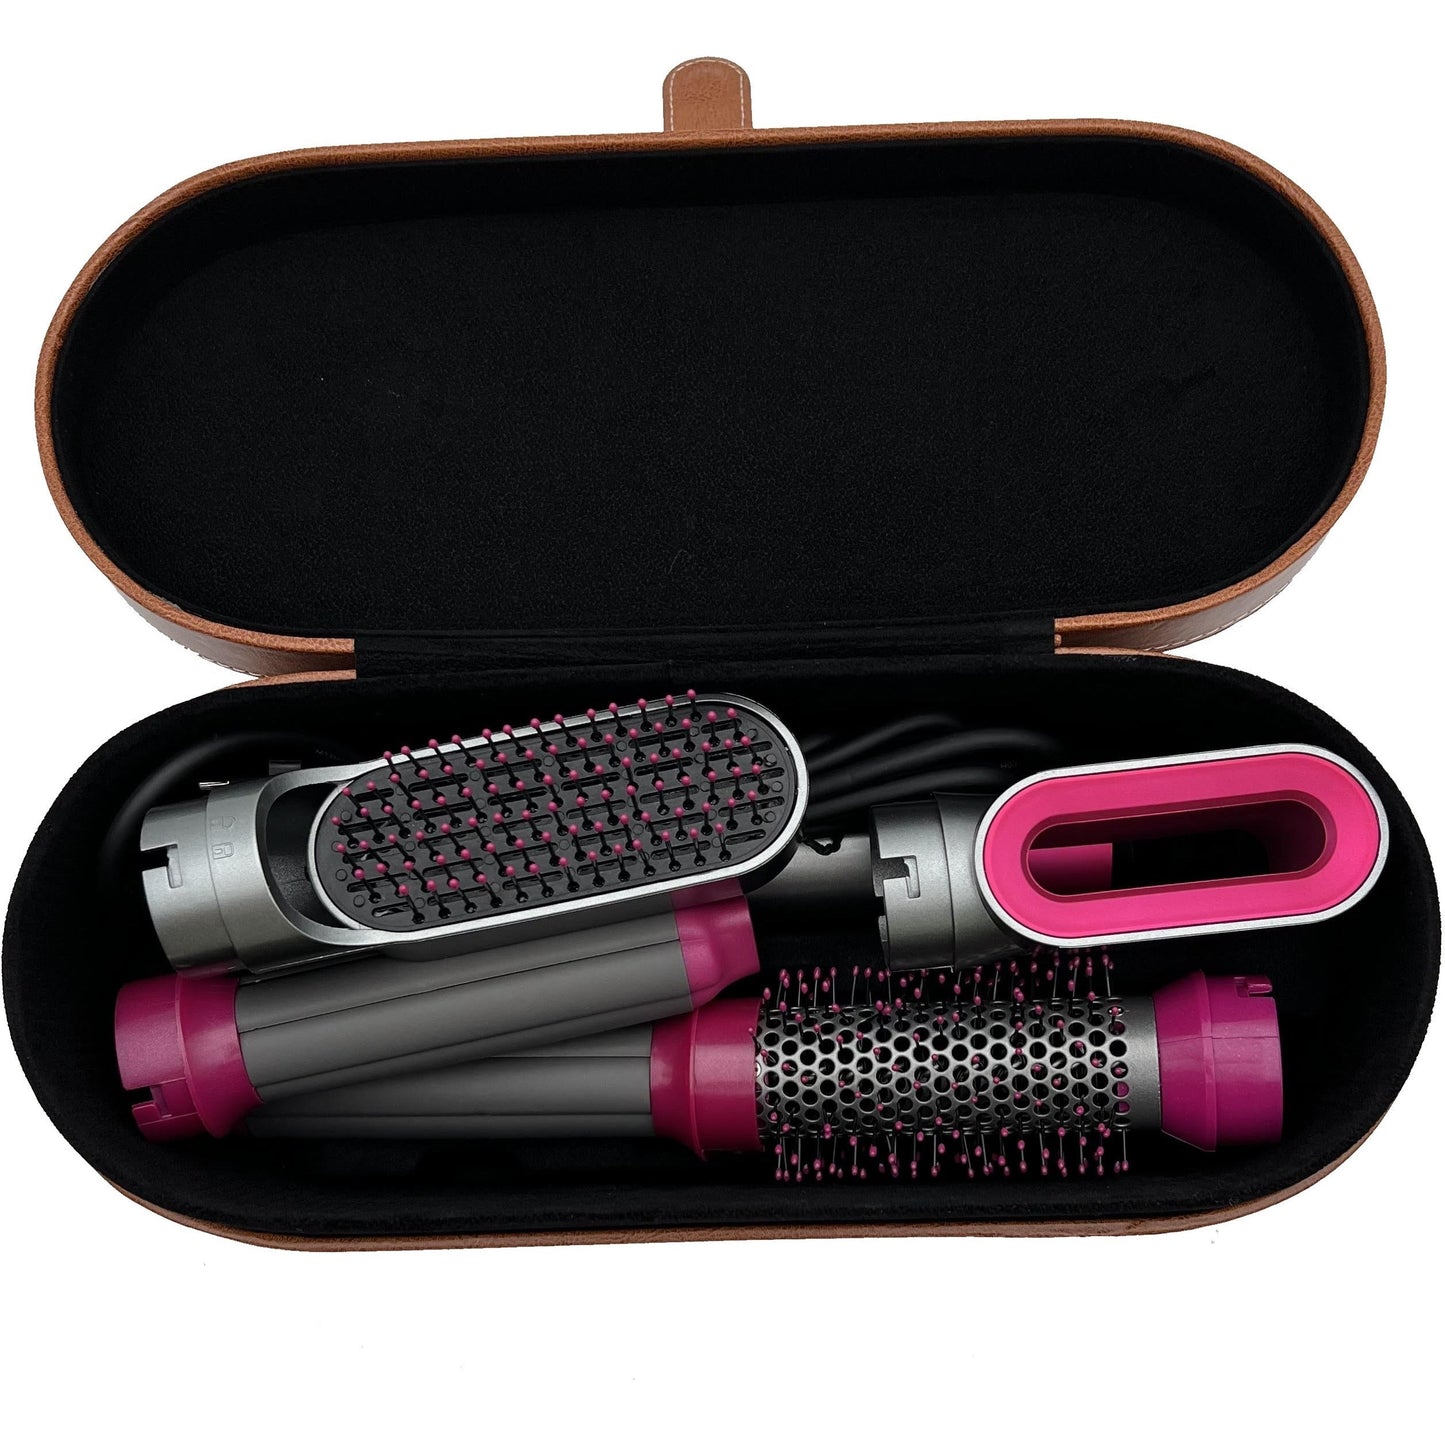 Airwrap blowdry brush 5in1 - versatile styling and volume